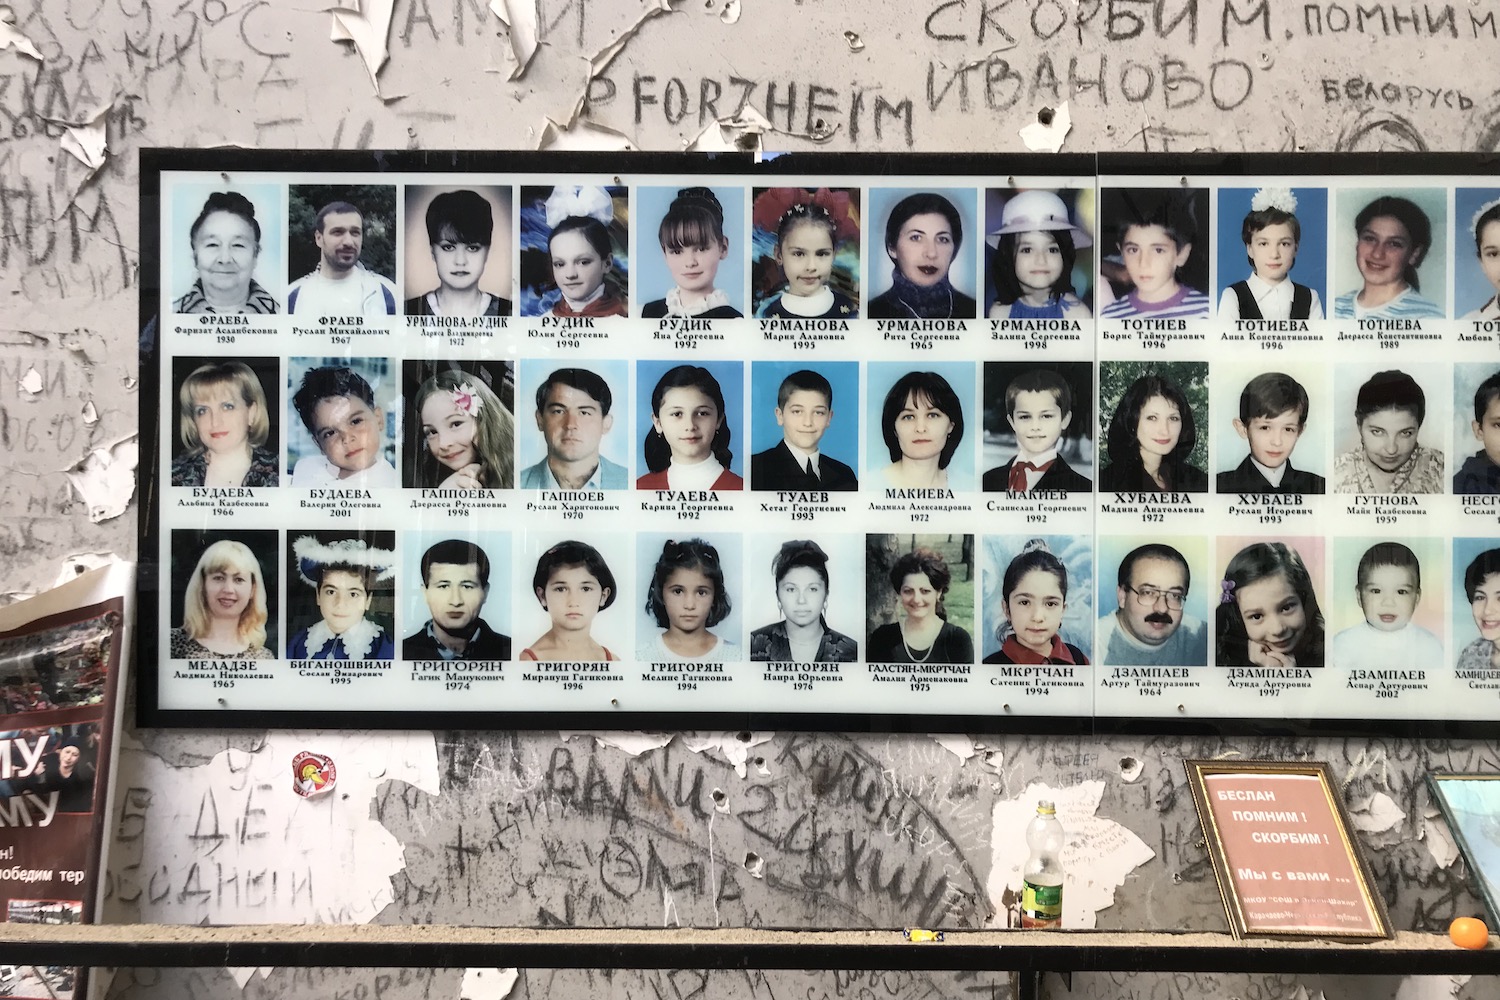 A memorial to the victims of the Beslan attack. Image: Felix Light